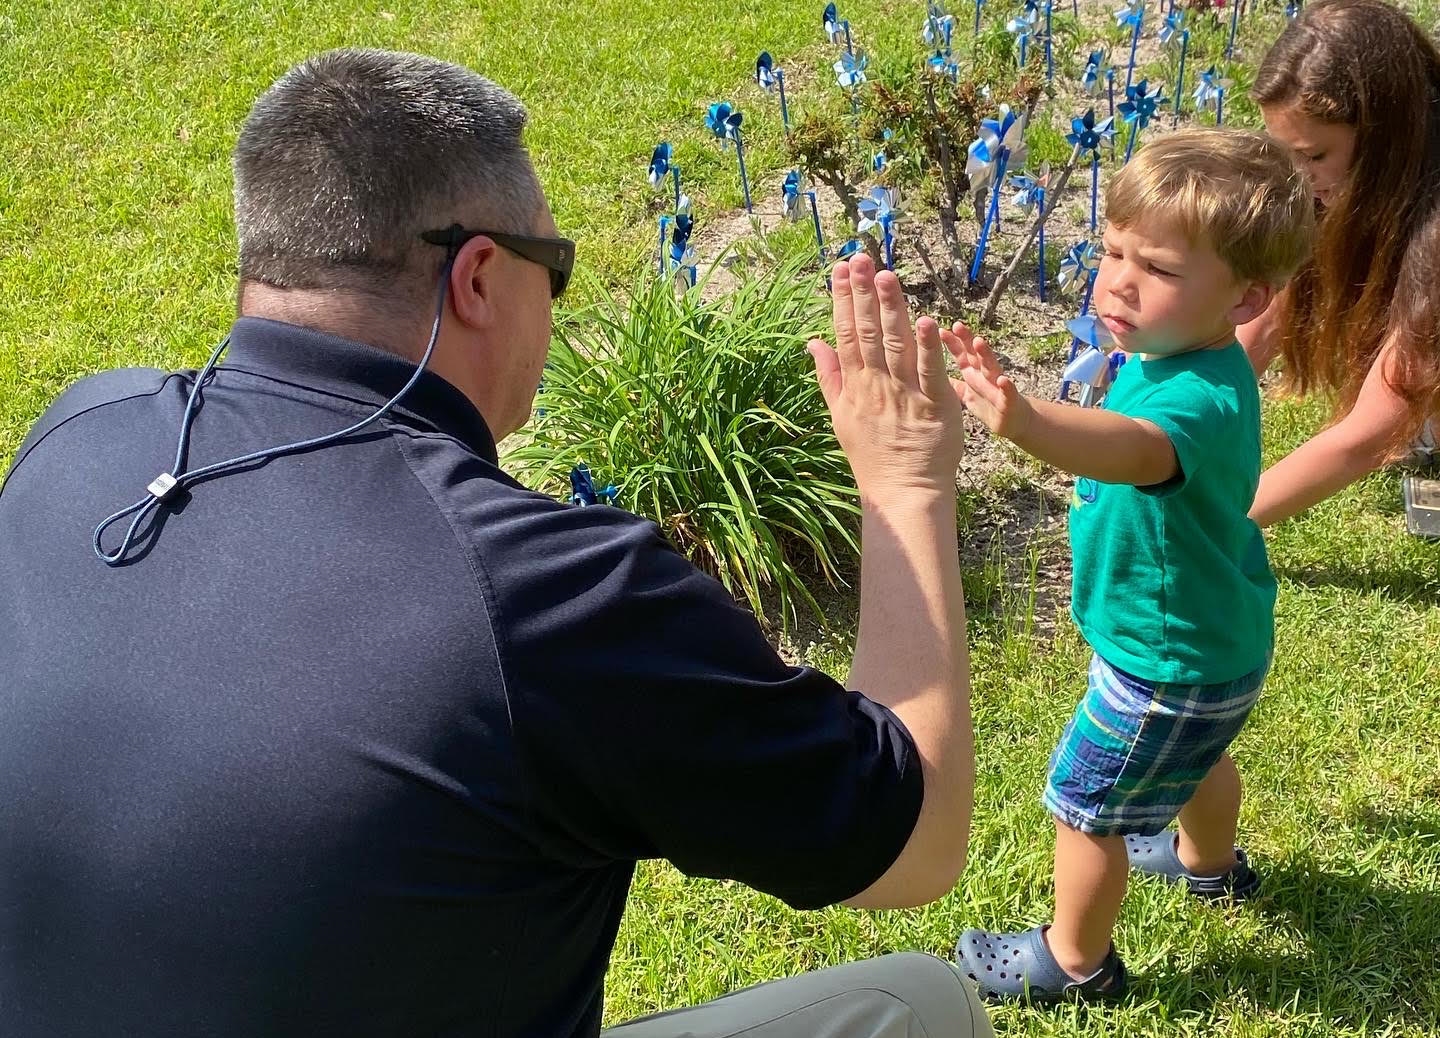 sheriff's department officer high fiving young boy